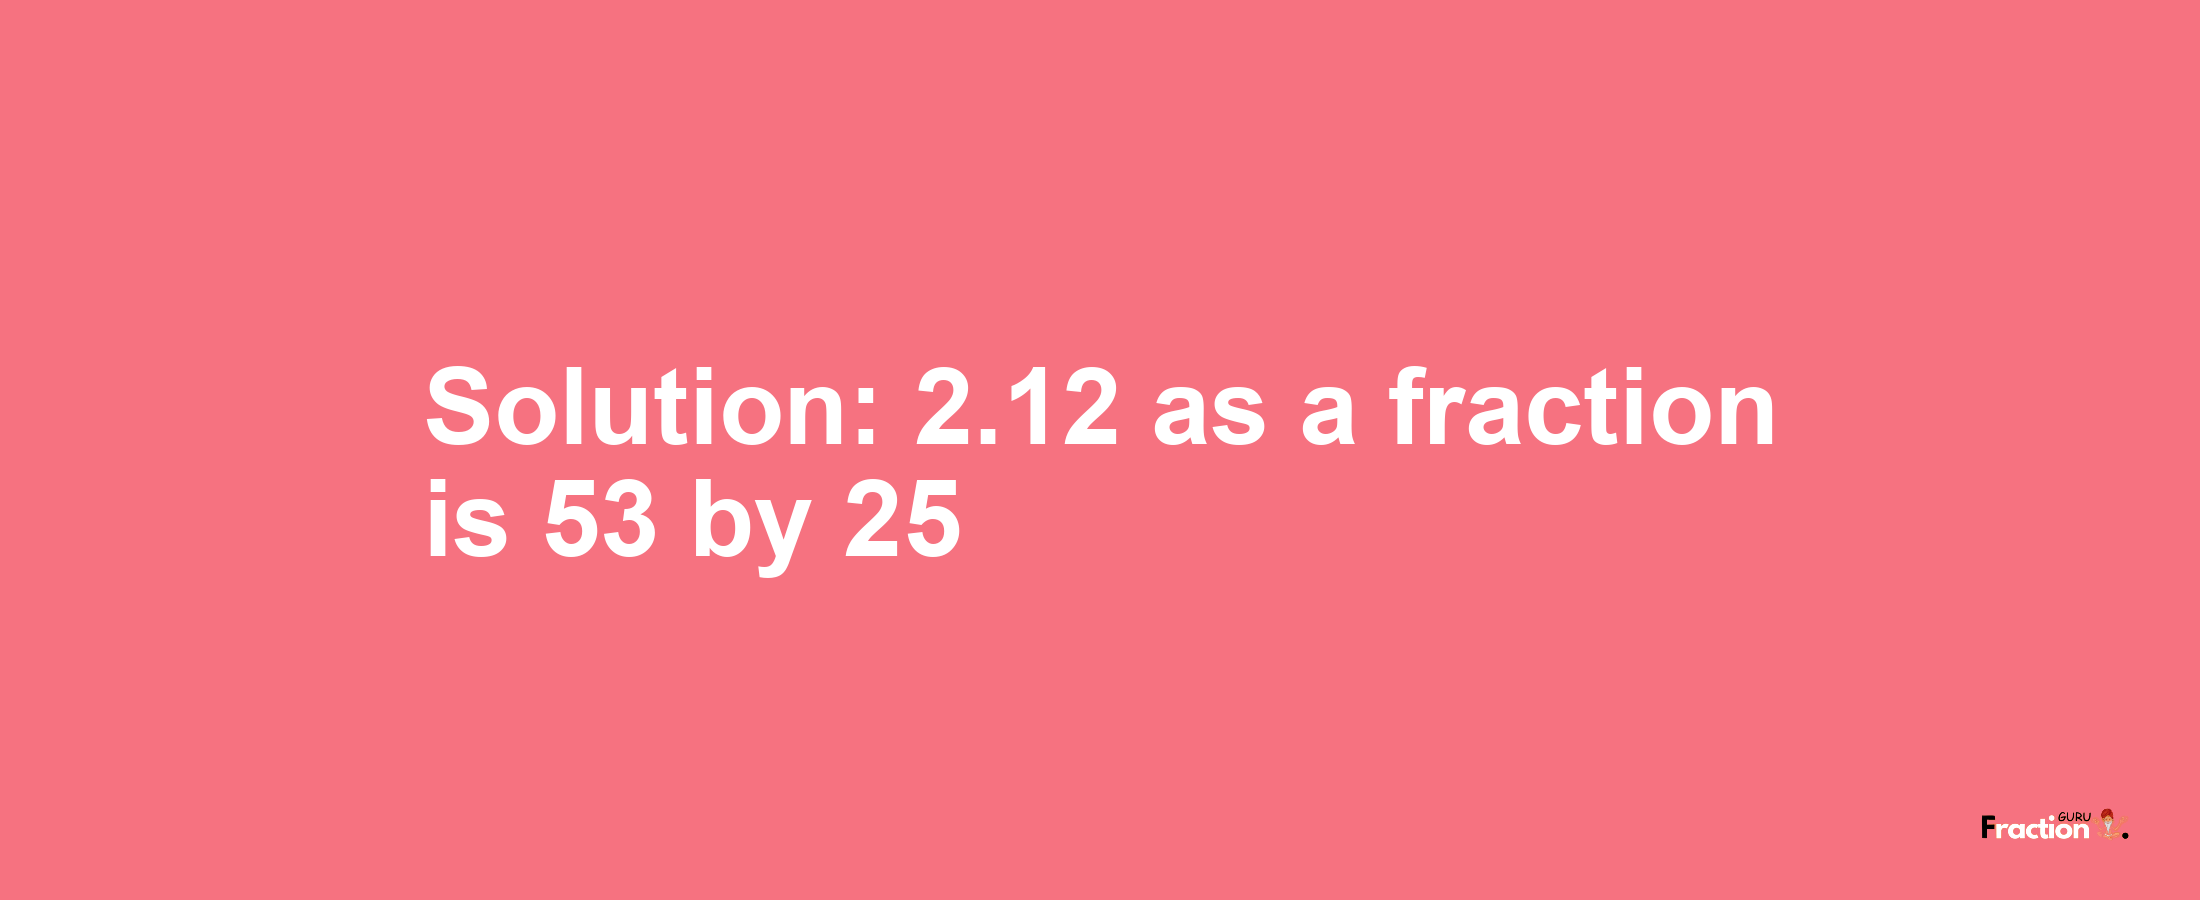 Solution:2.12 as a fraction is 53/25